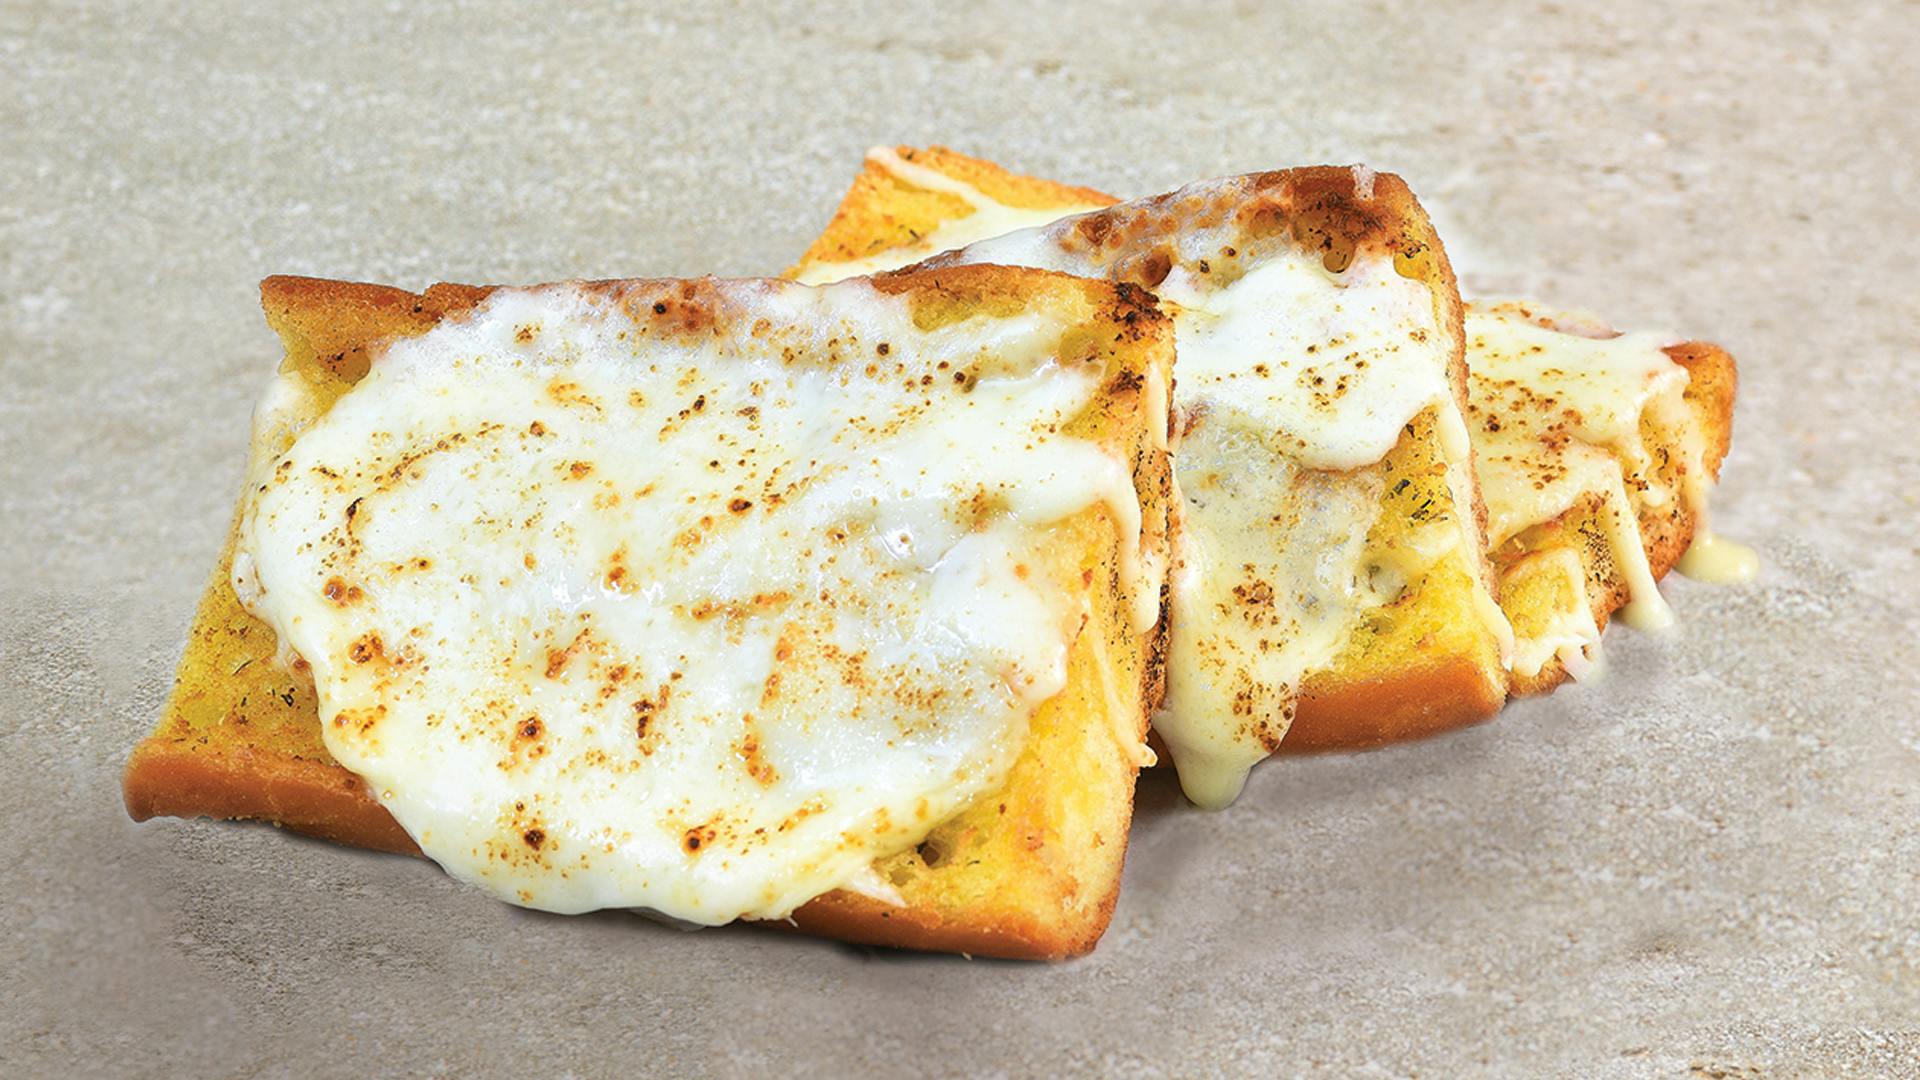 GARLIC BREAD WITH CHEESE from Boli's Pizza in Washington, DC